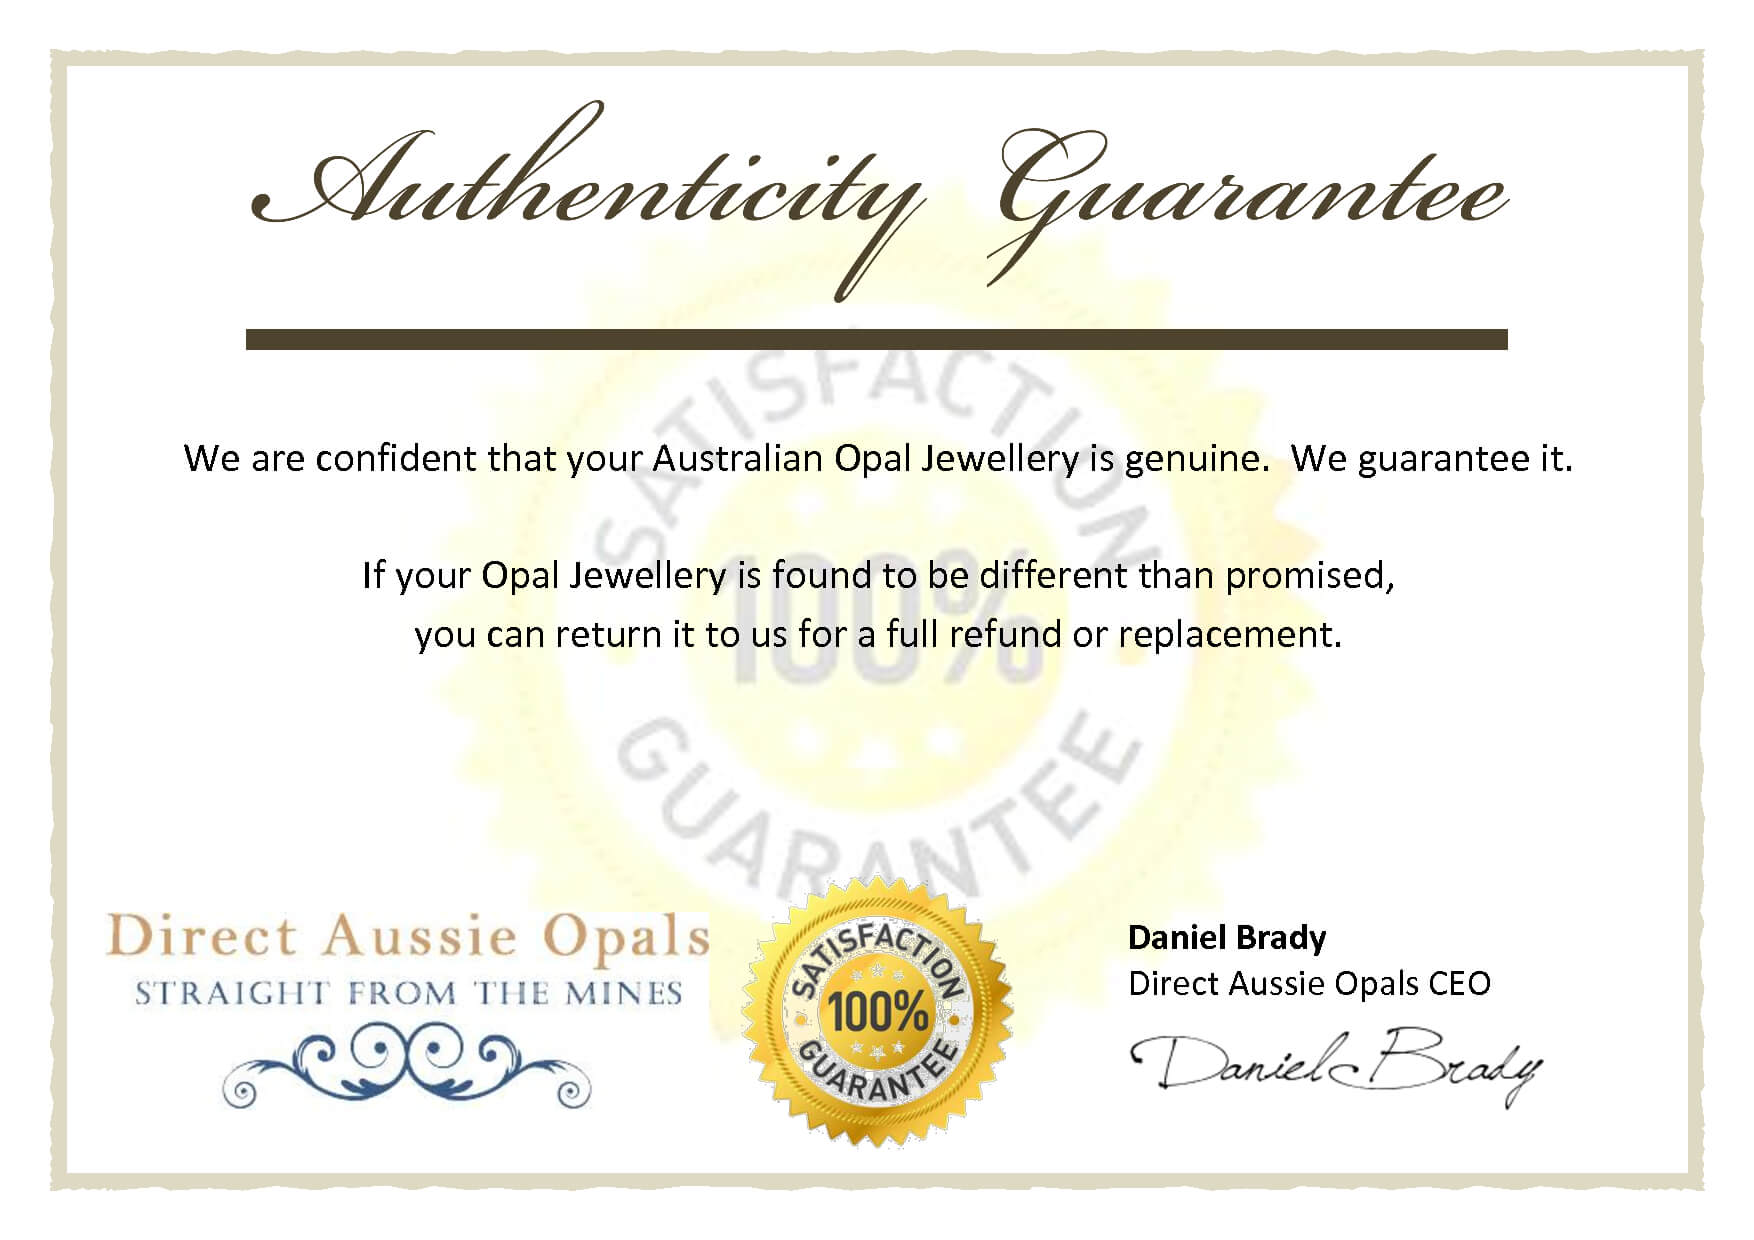 007 Certificate Of Authenticity Template Free Aplg Intended For Certificate Of Authenticity Template